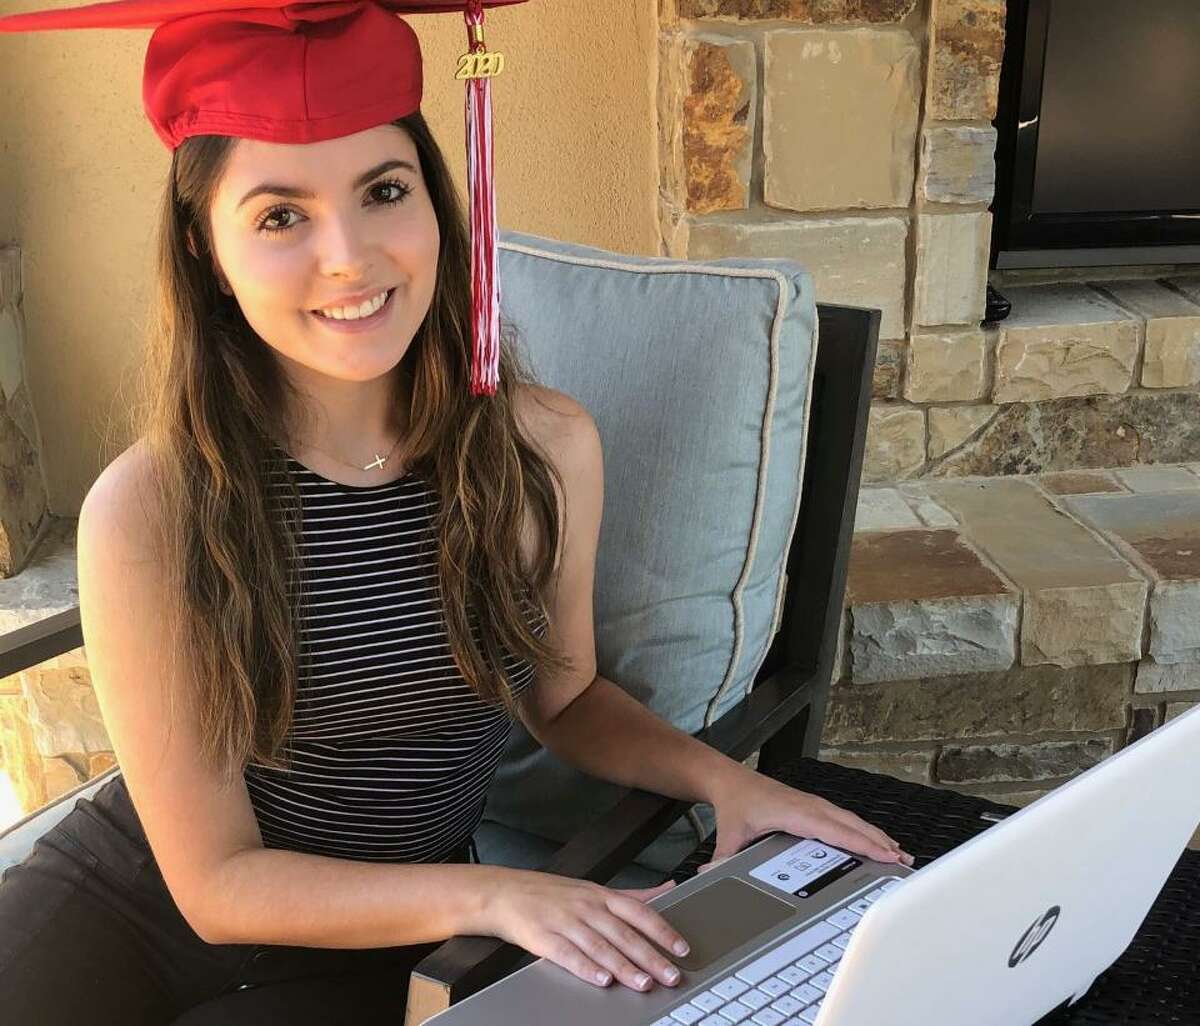 Tomball High School valedictorian Gianna Gilbert reflects on shortened senior year in light of the COVID-19 pandemic.